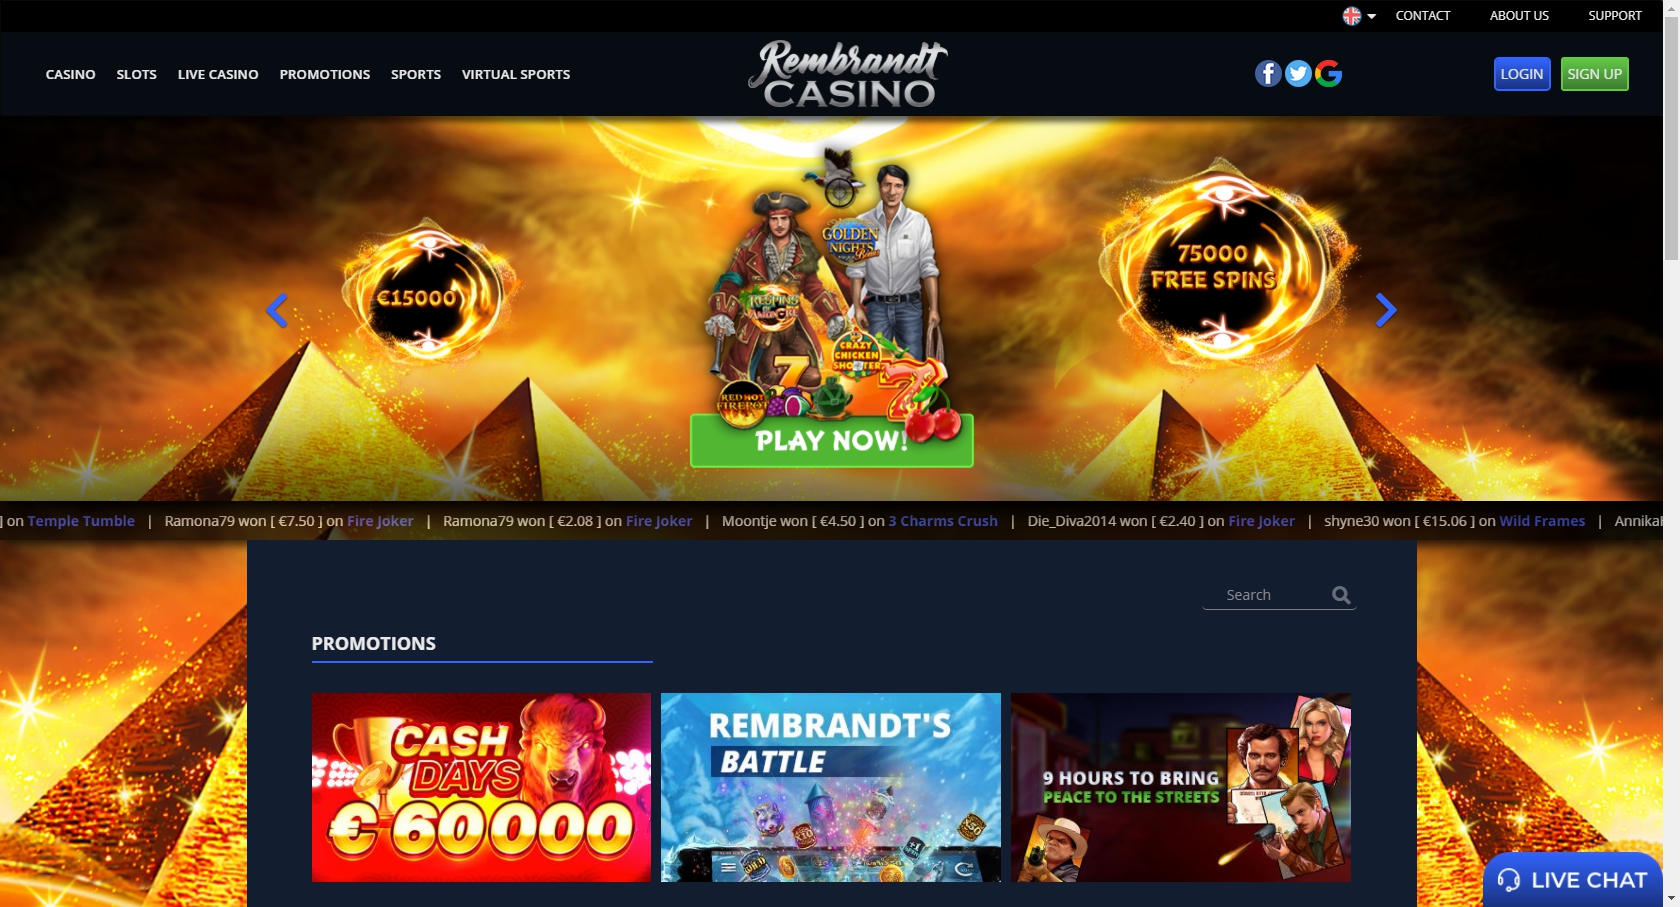 Rembrandt Casino Review